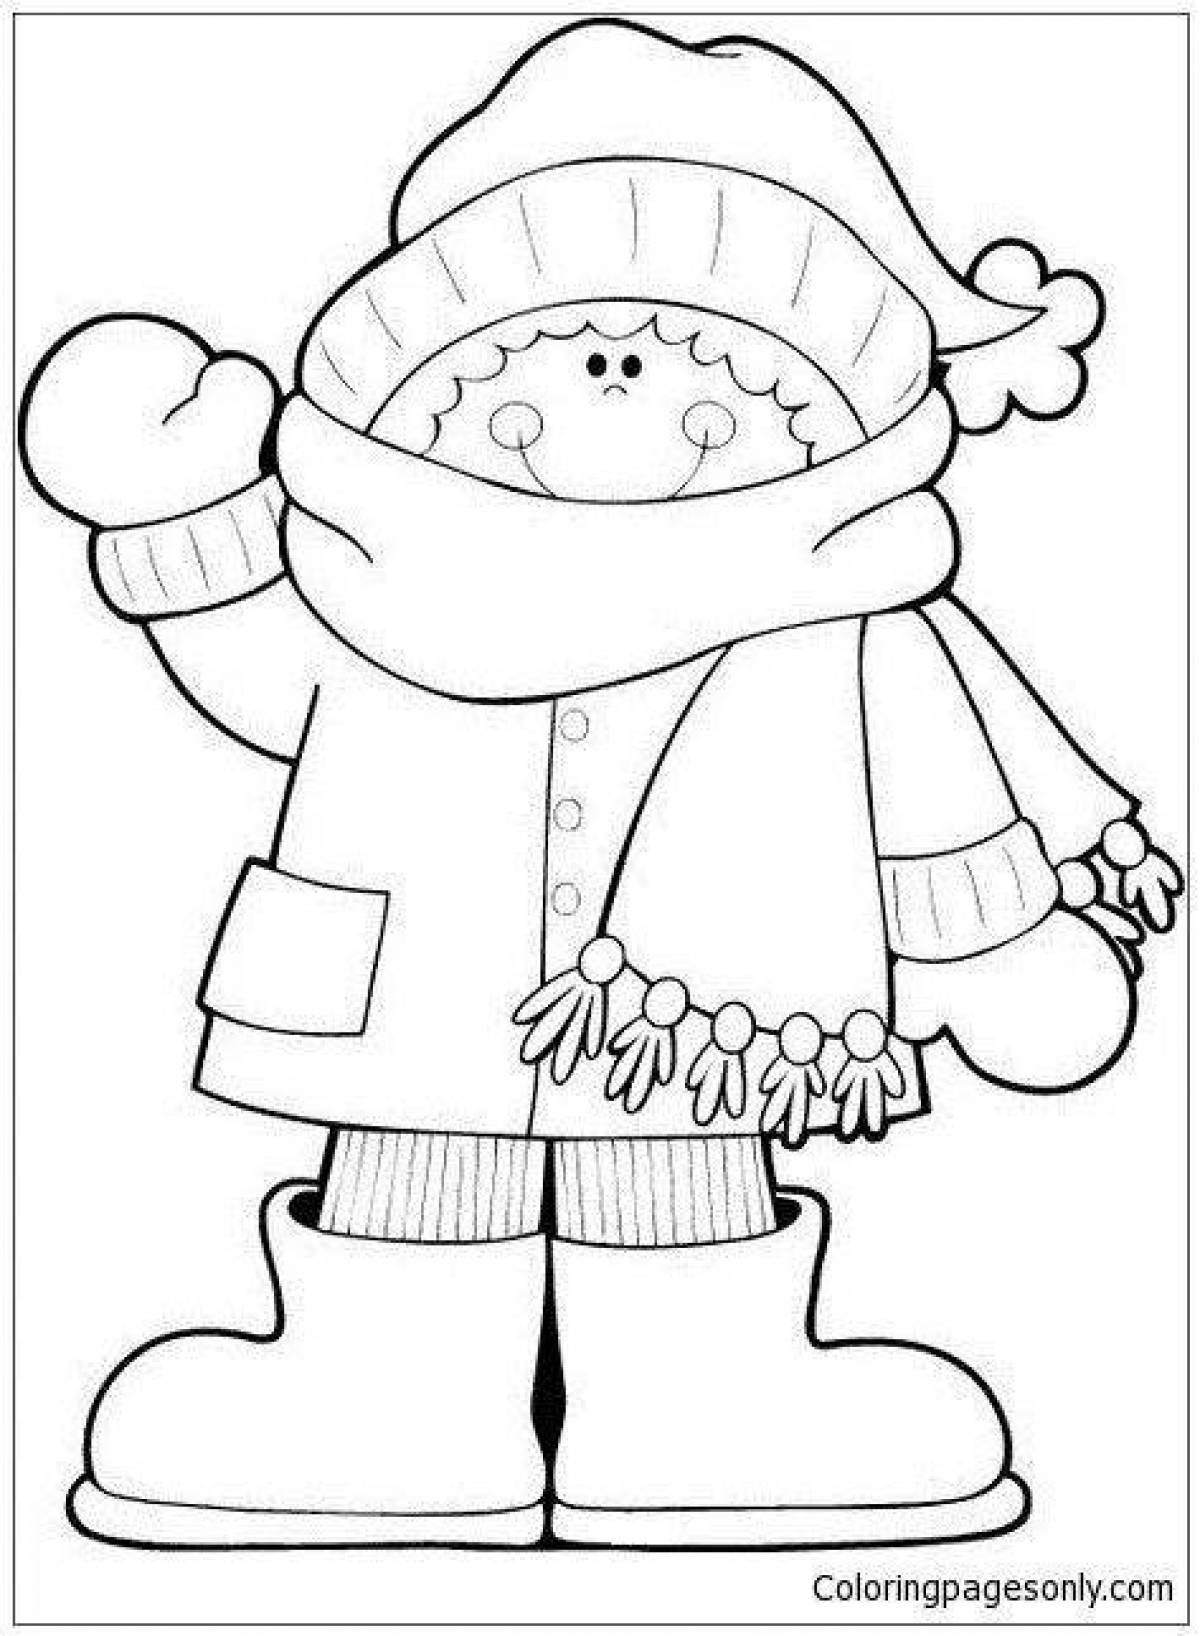 Gorgeous winter clothes coloring book for 4-5 year olds